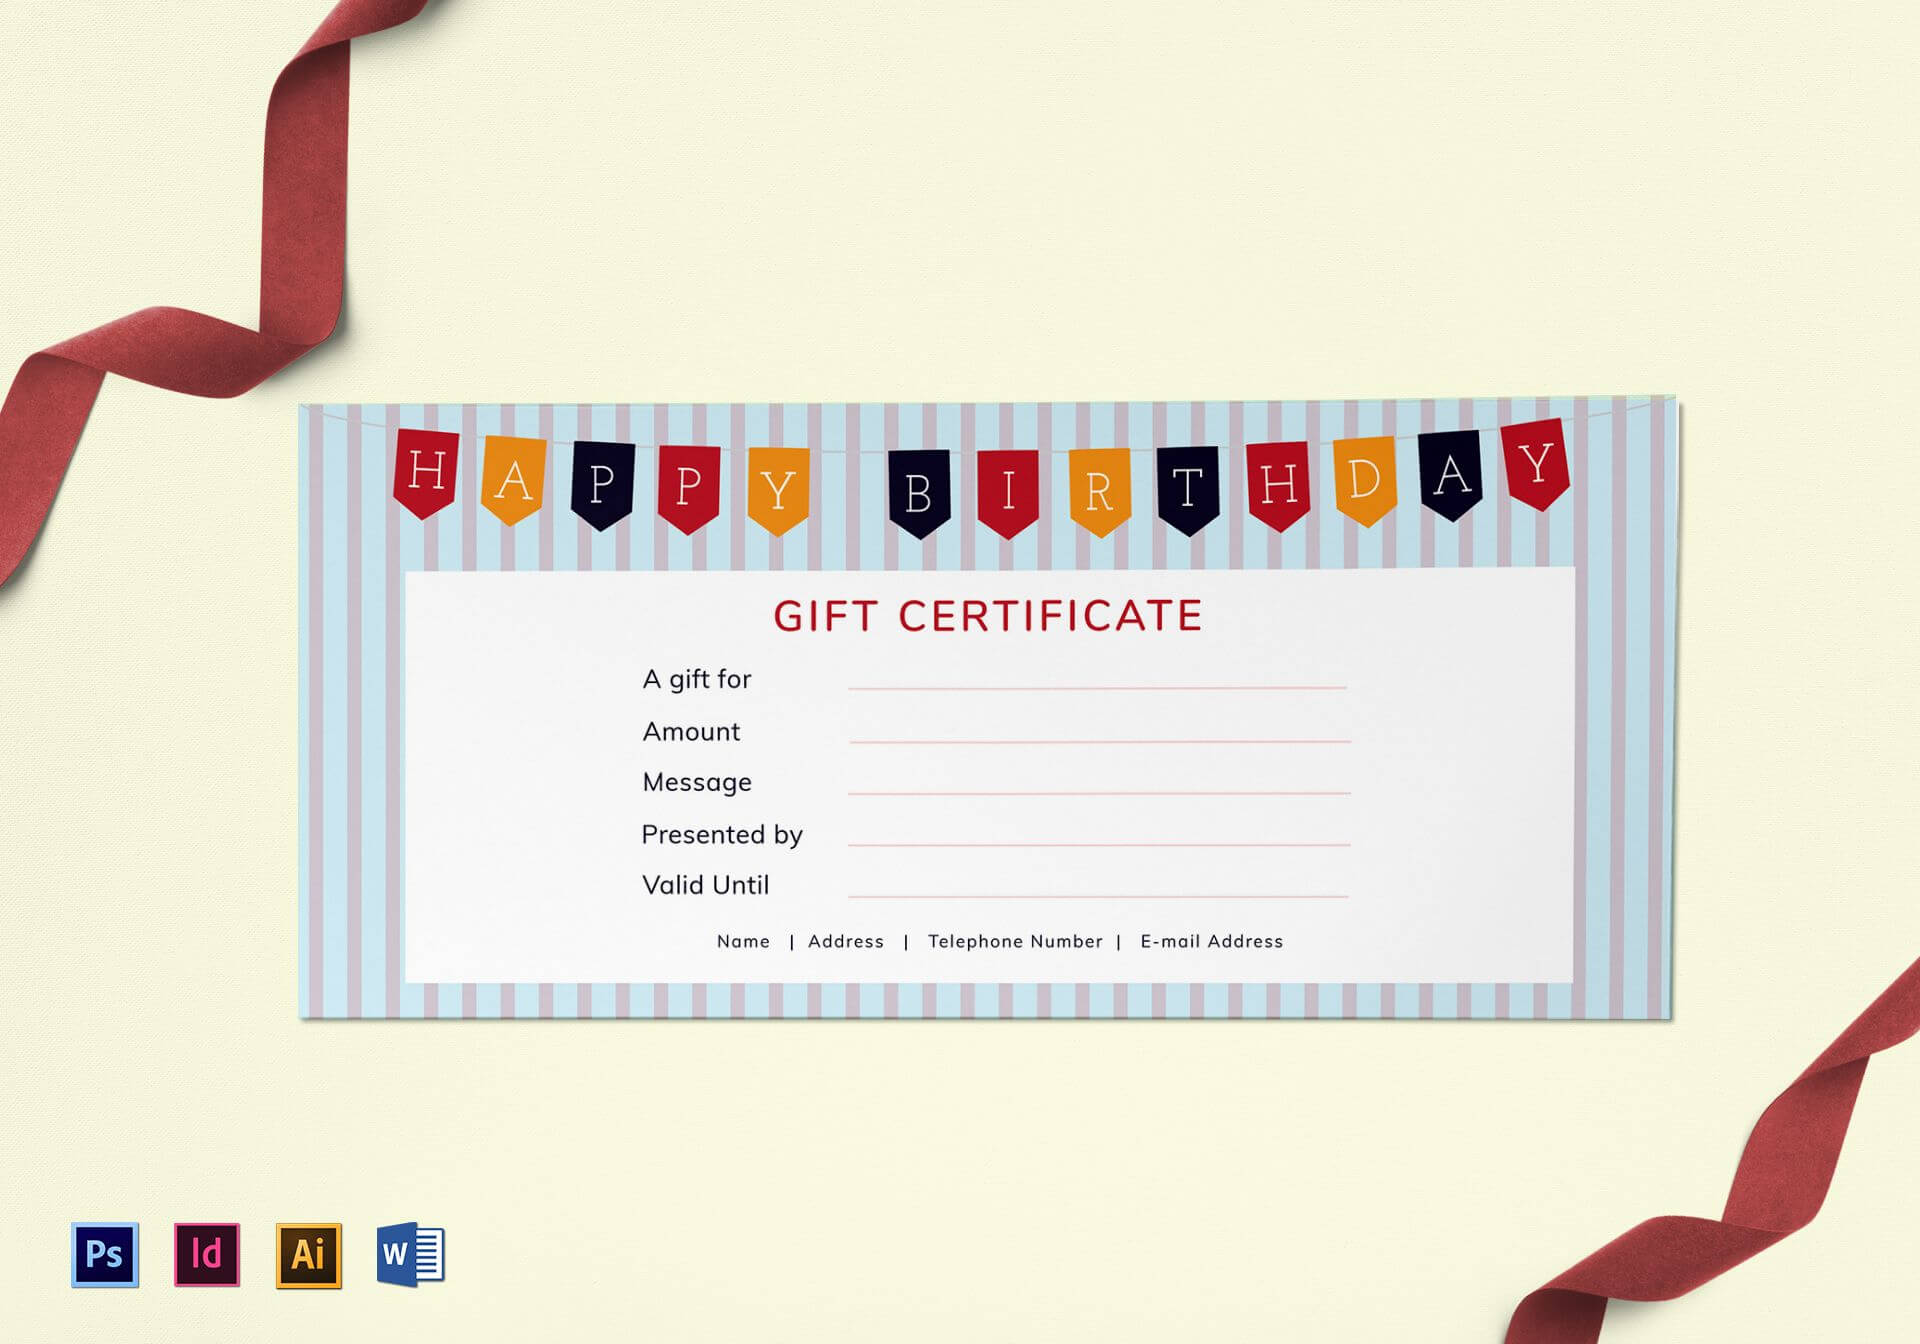 Happy Birthday Gift Certificate Template With Gift Certificate Template Photoshop